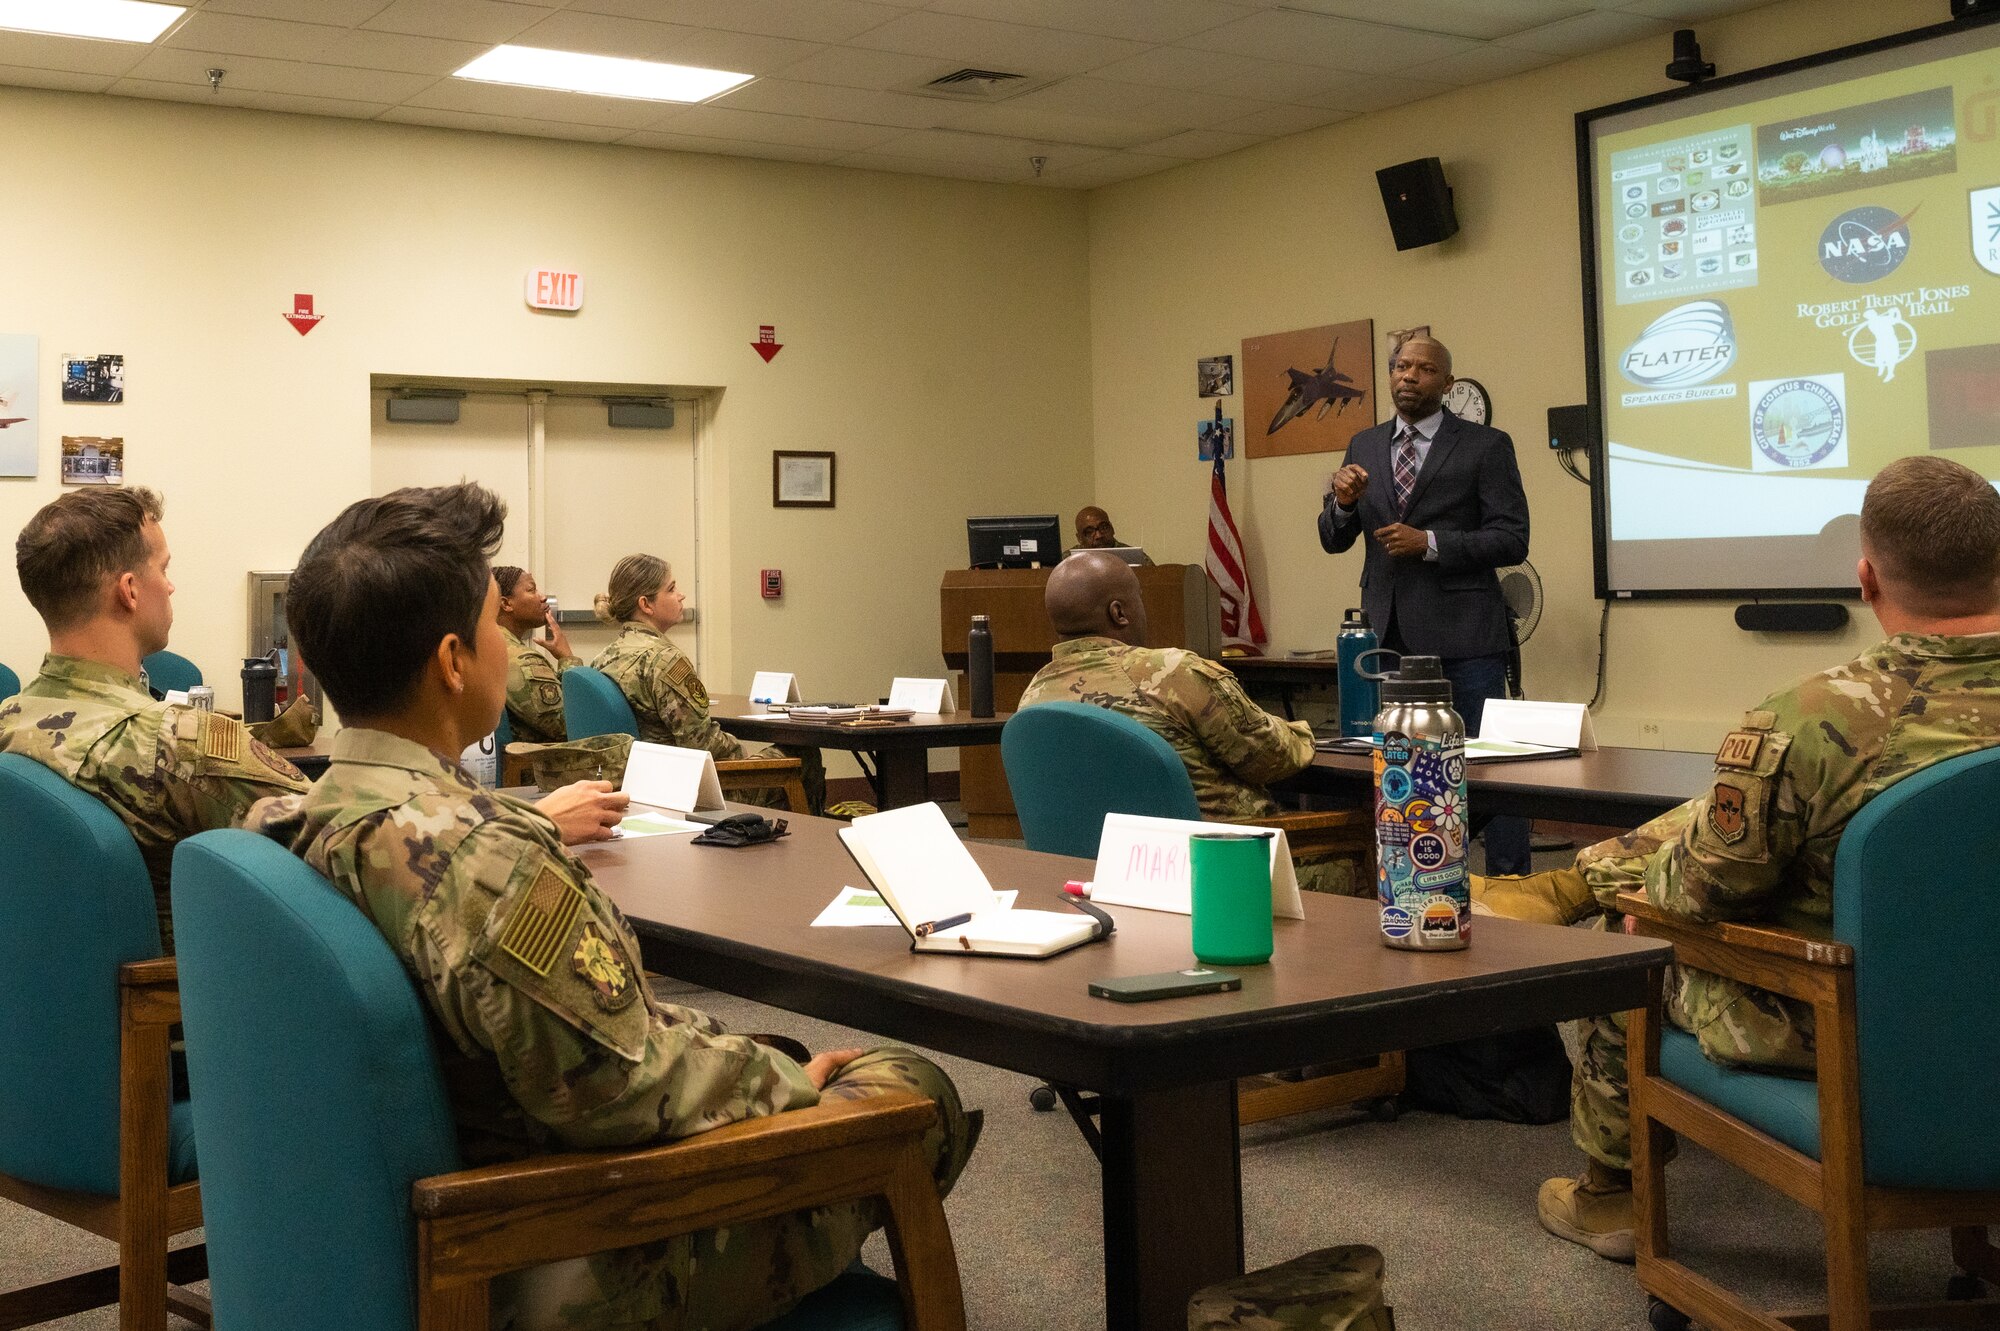 U.S. Air Force Chief Master Sgt. (Ret.) Todd Simmons, former Command Chief Master Sergeant of Air University, Maxwell Air Force Base, Alabama, speaks to aspiring senior enlisted leaders during an SEL course Nov. 29, 2022, at Luke Air Force Base, Arizona.